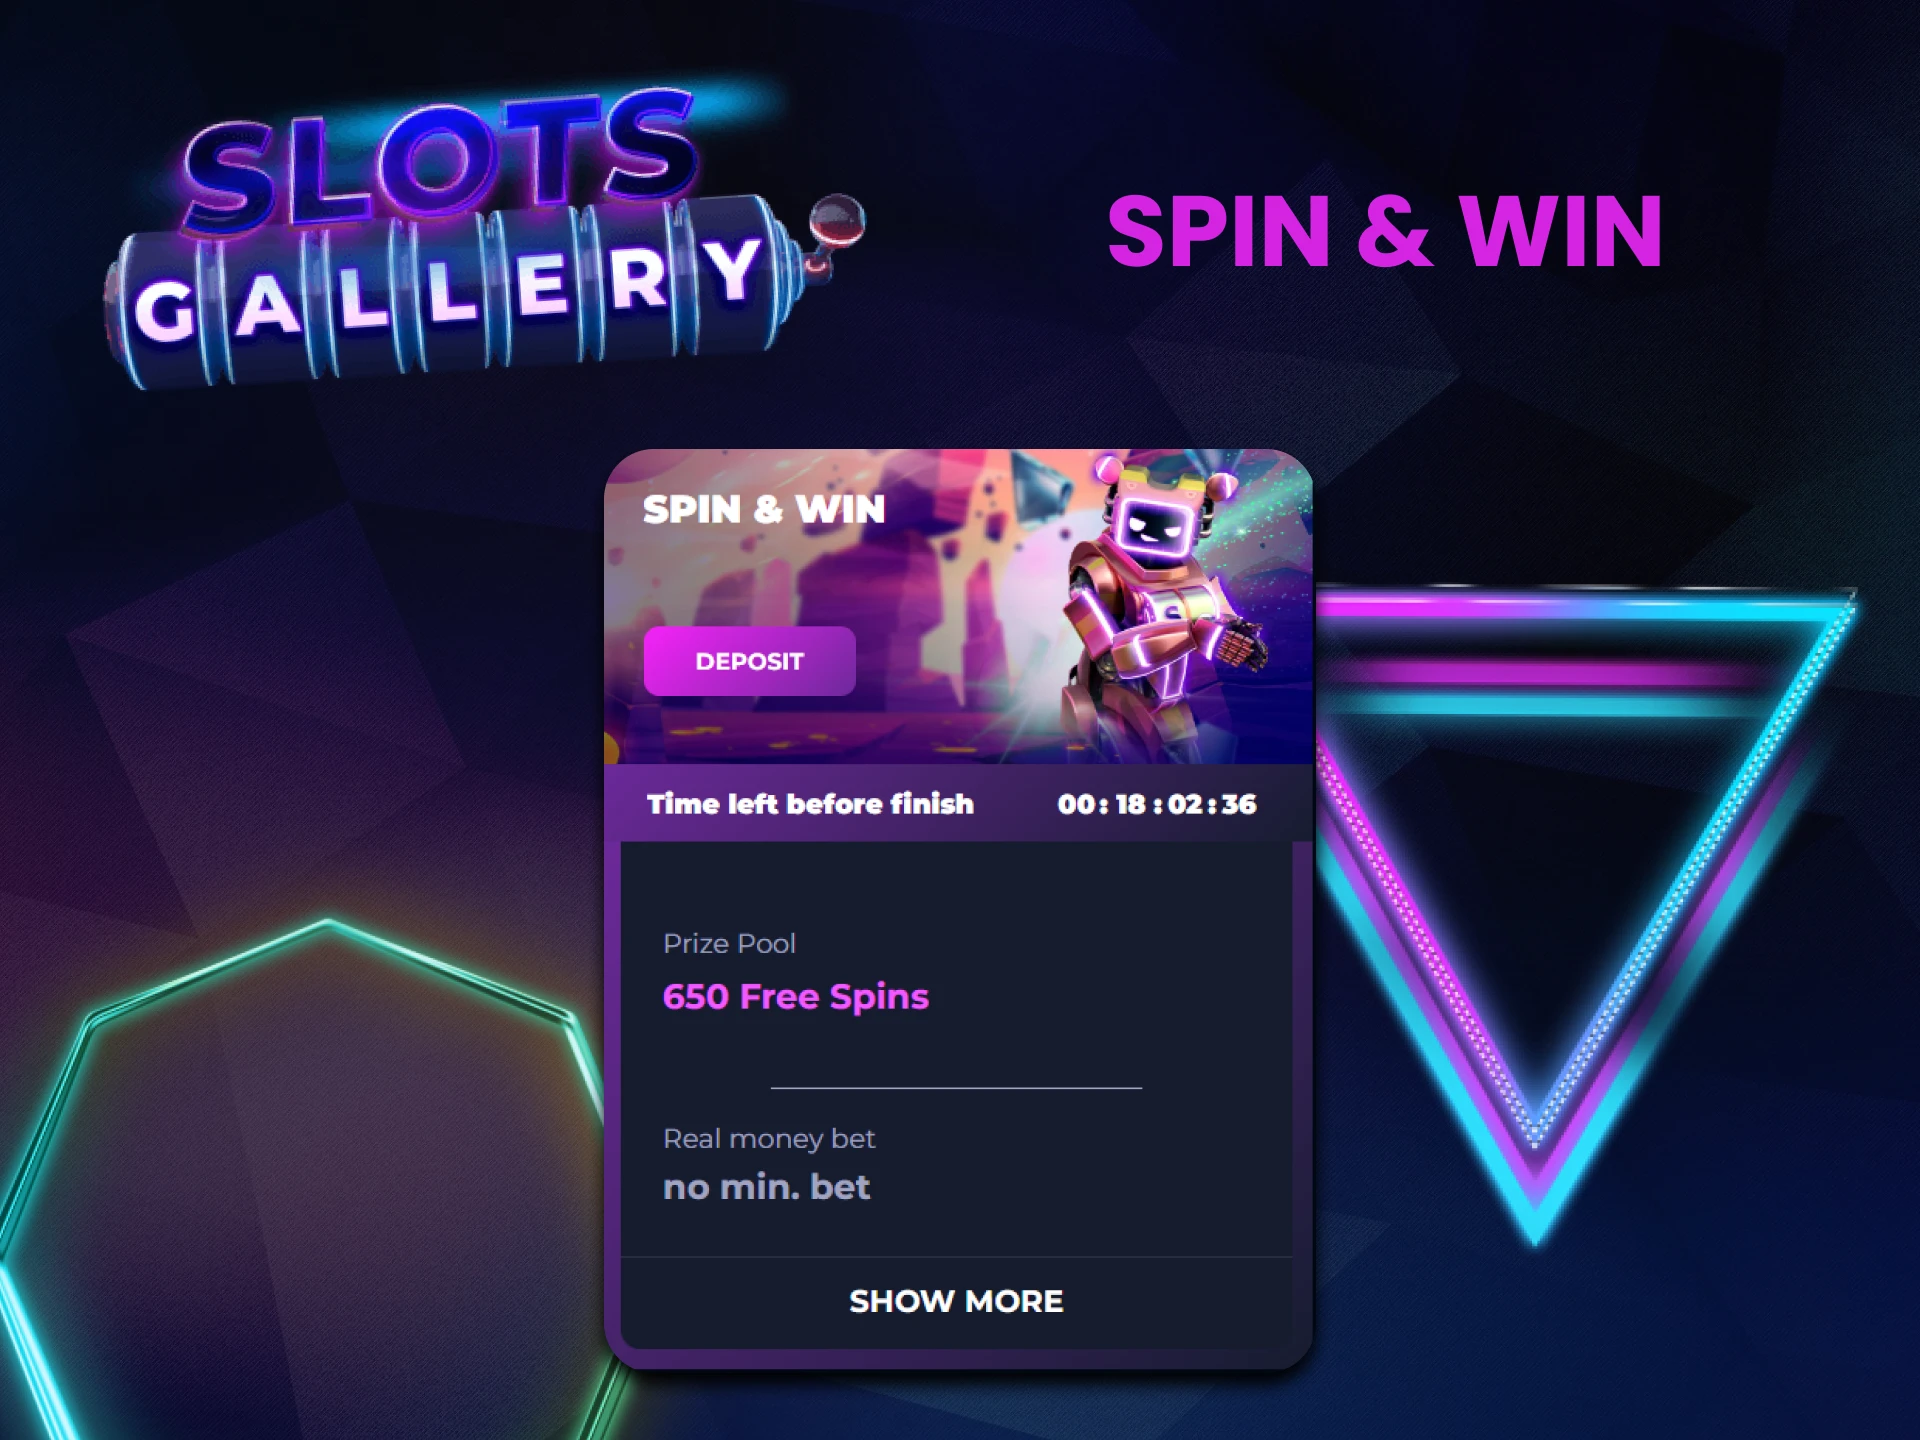 Take part in the Spin&Win tournament from Slots Gallery.